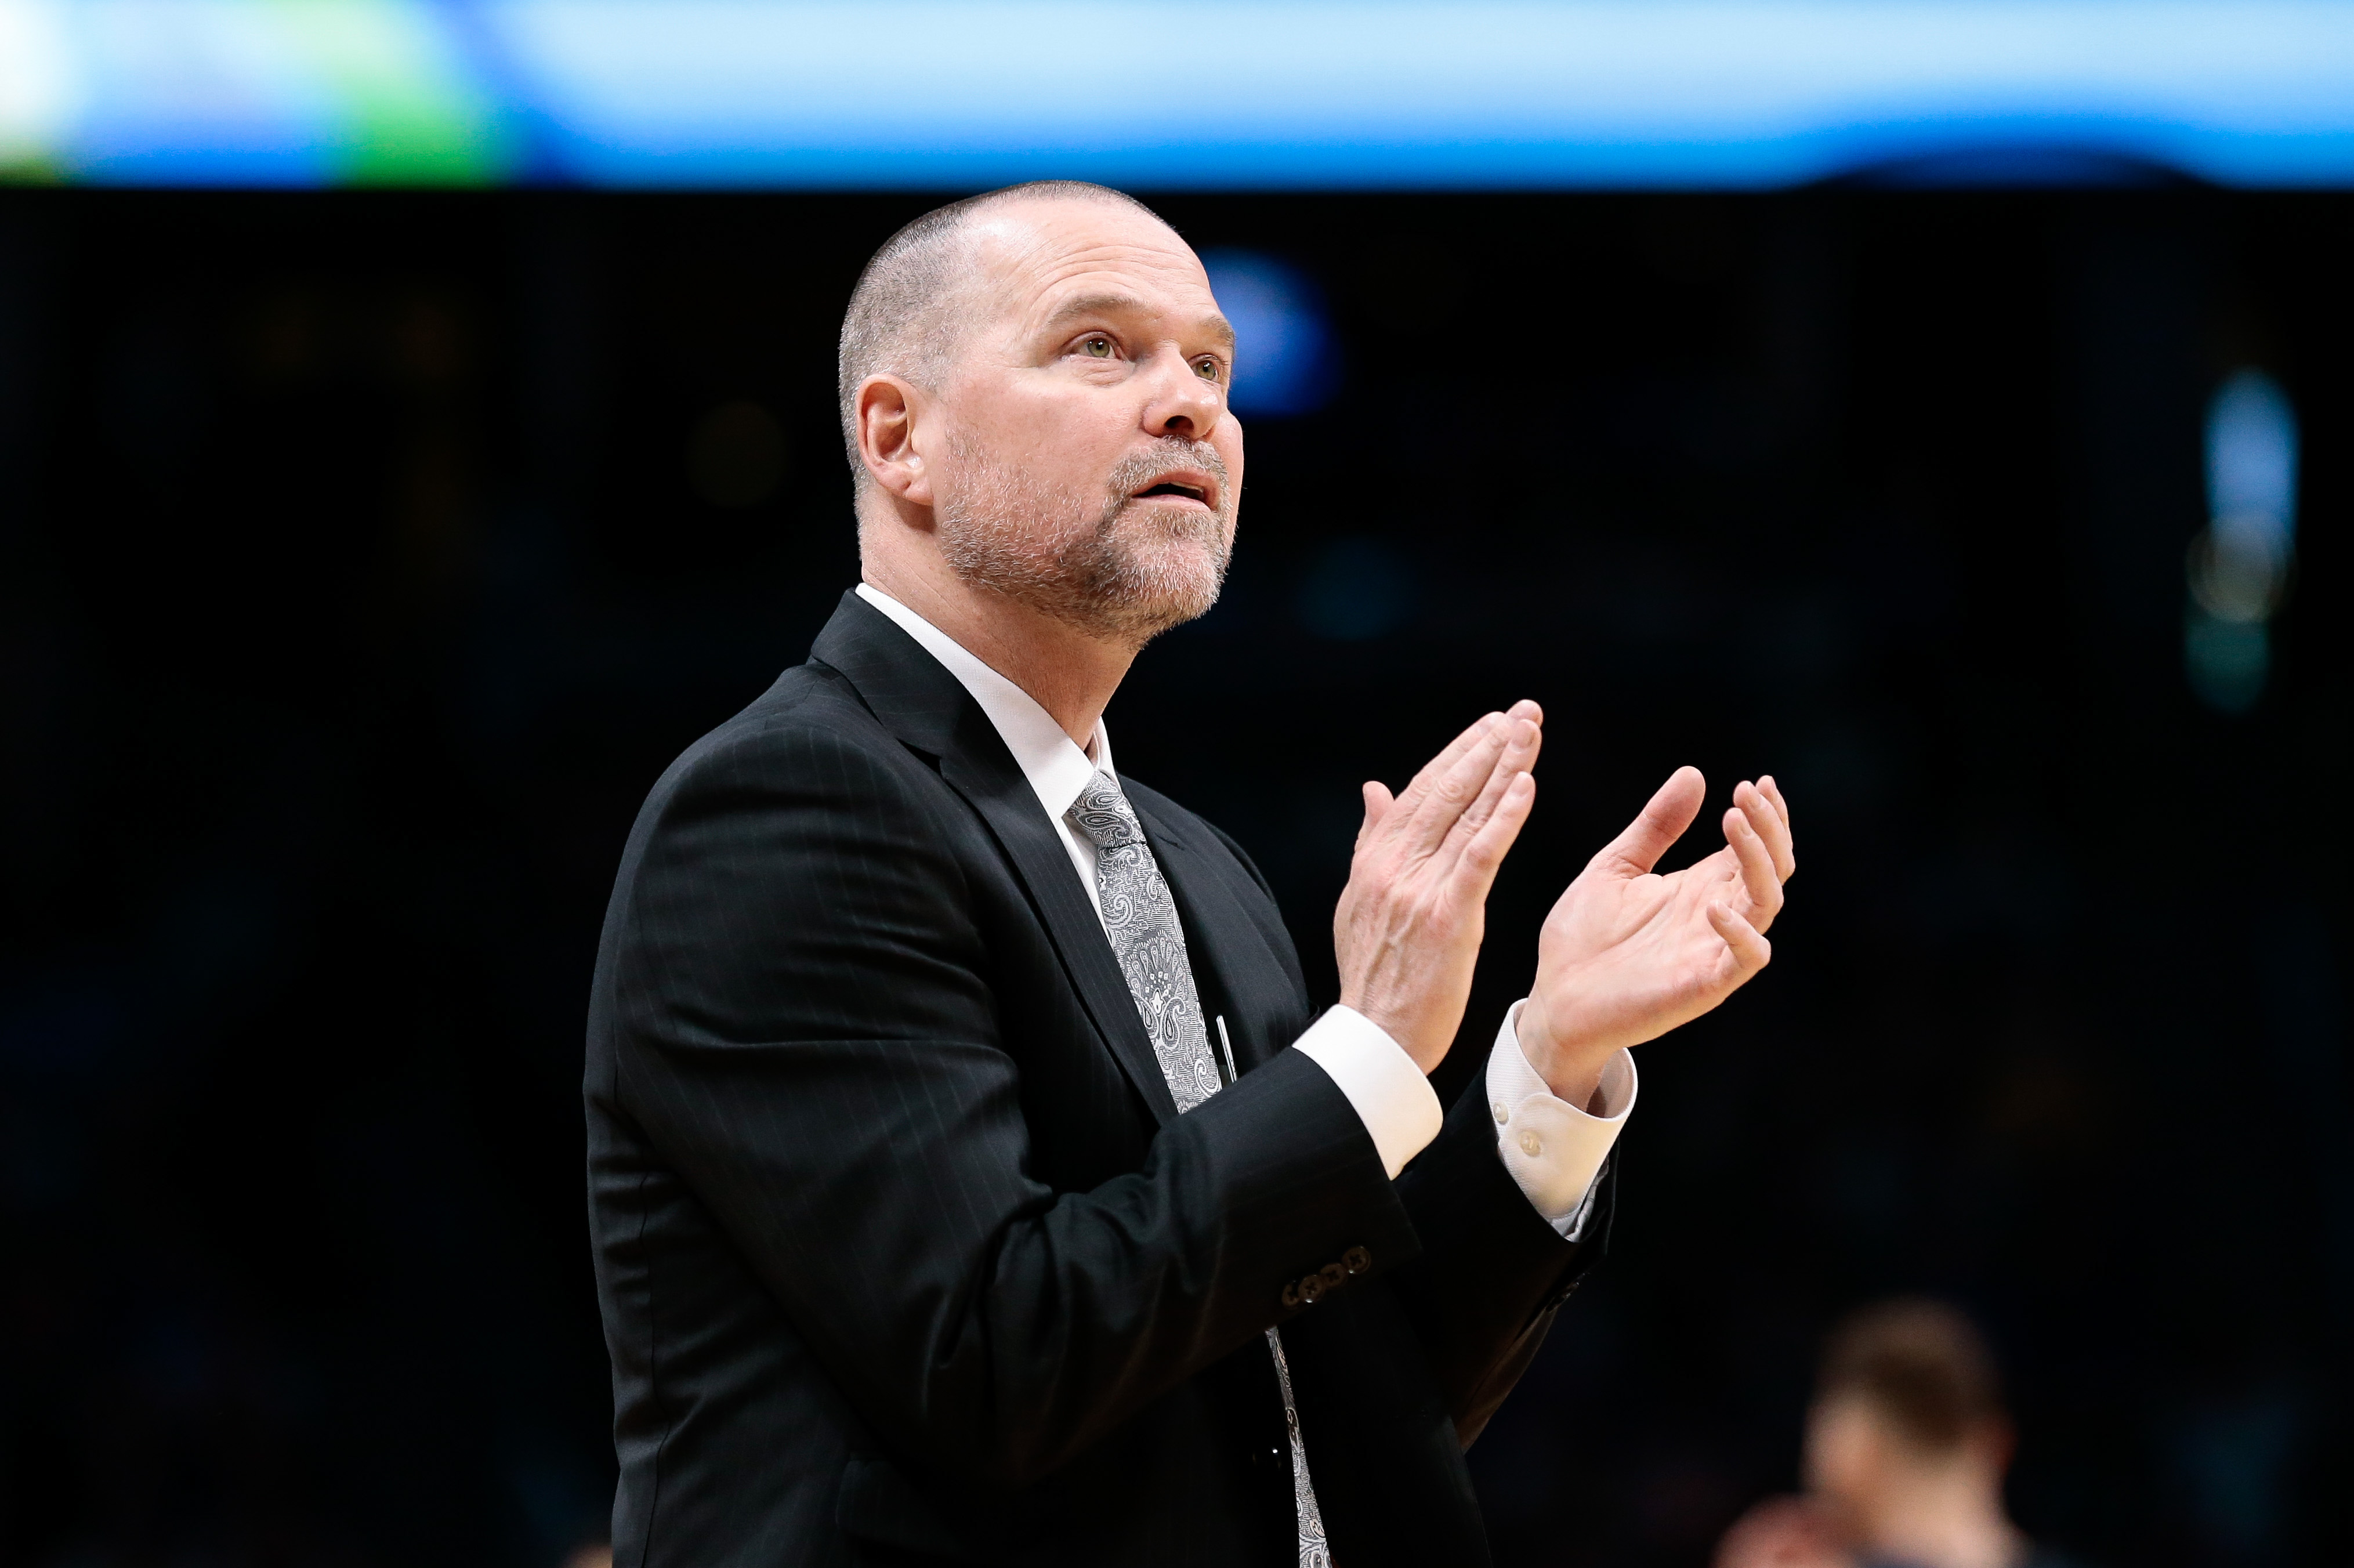 Denver Nuggets head coach Michael Malone reacts in the second quarter against the Detroit Pistons at the Pepsi Center.